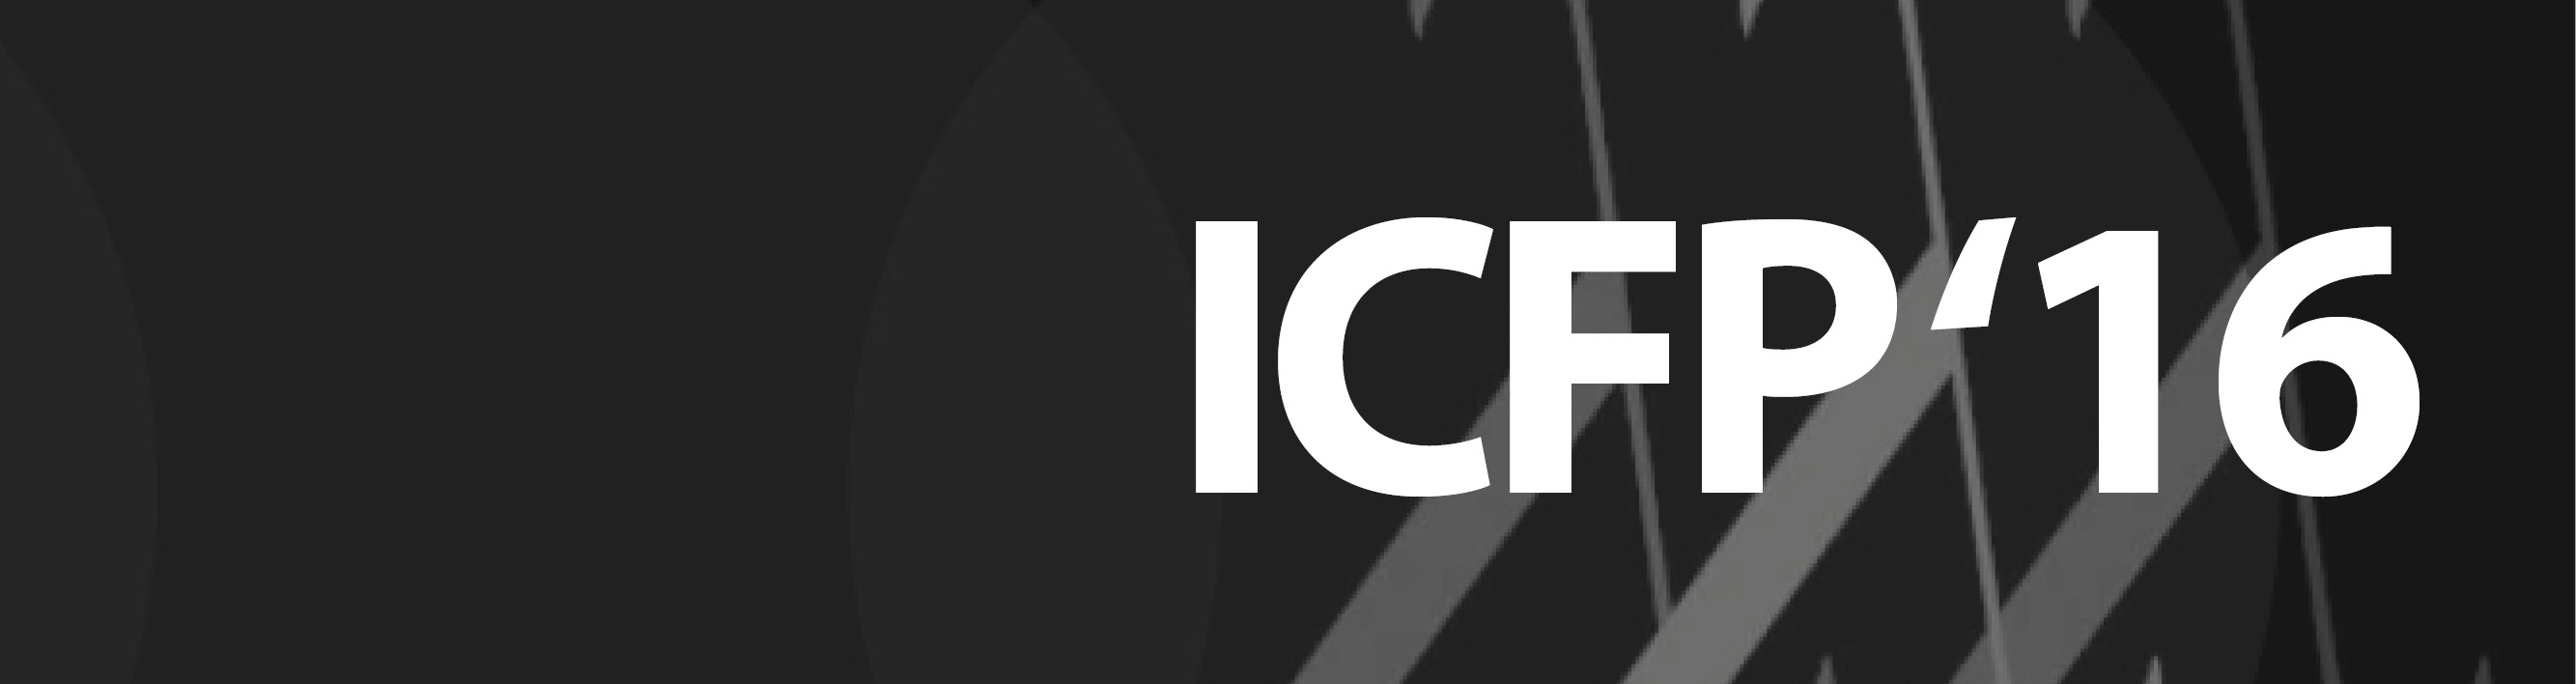 Article collection from 2016's ICFP conference